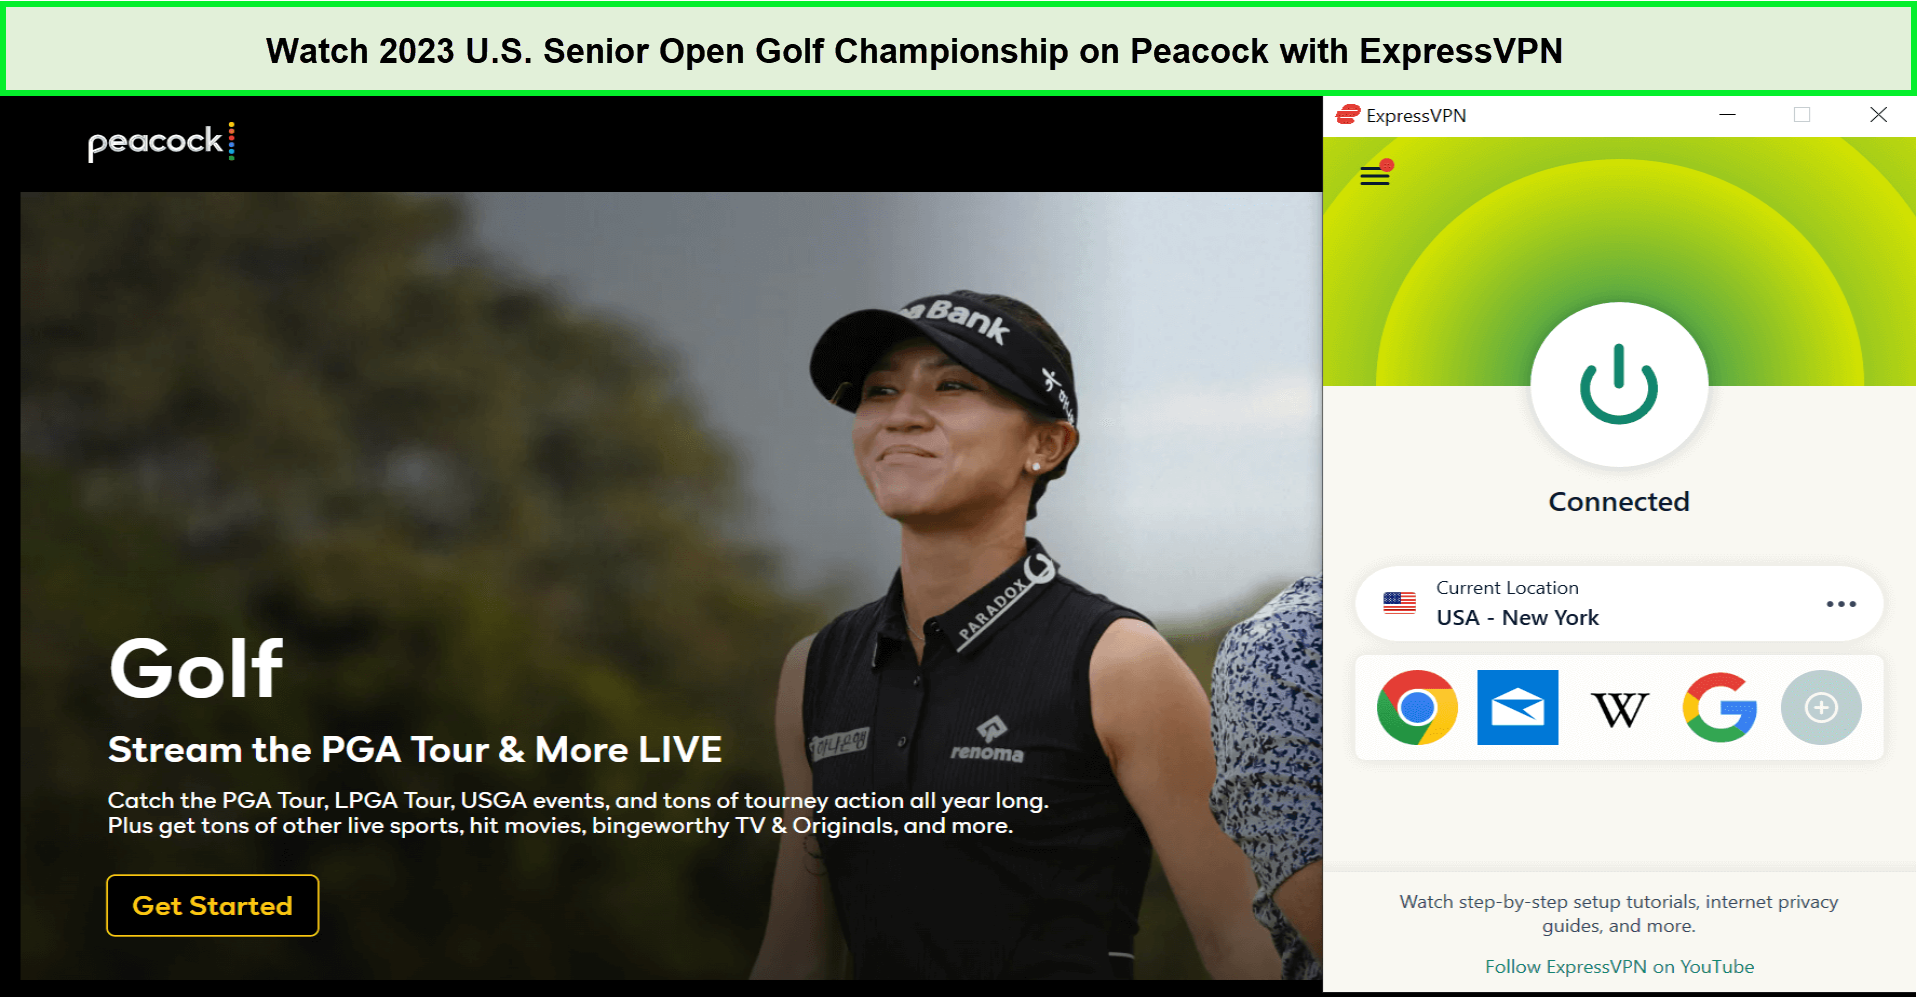 Watch-2023-U.S.-Senior-Open-Golf-Championship-in-Hong Kong-on-Peacock-with-ExpressVPN